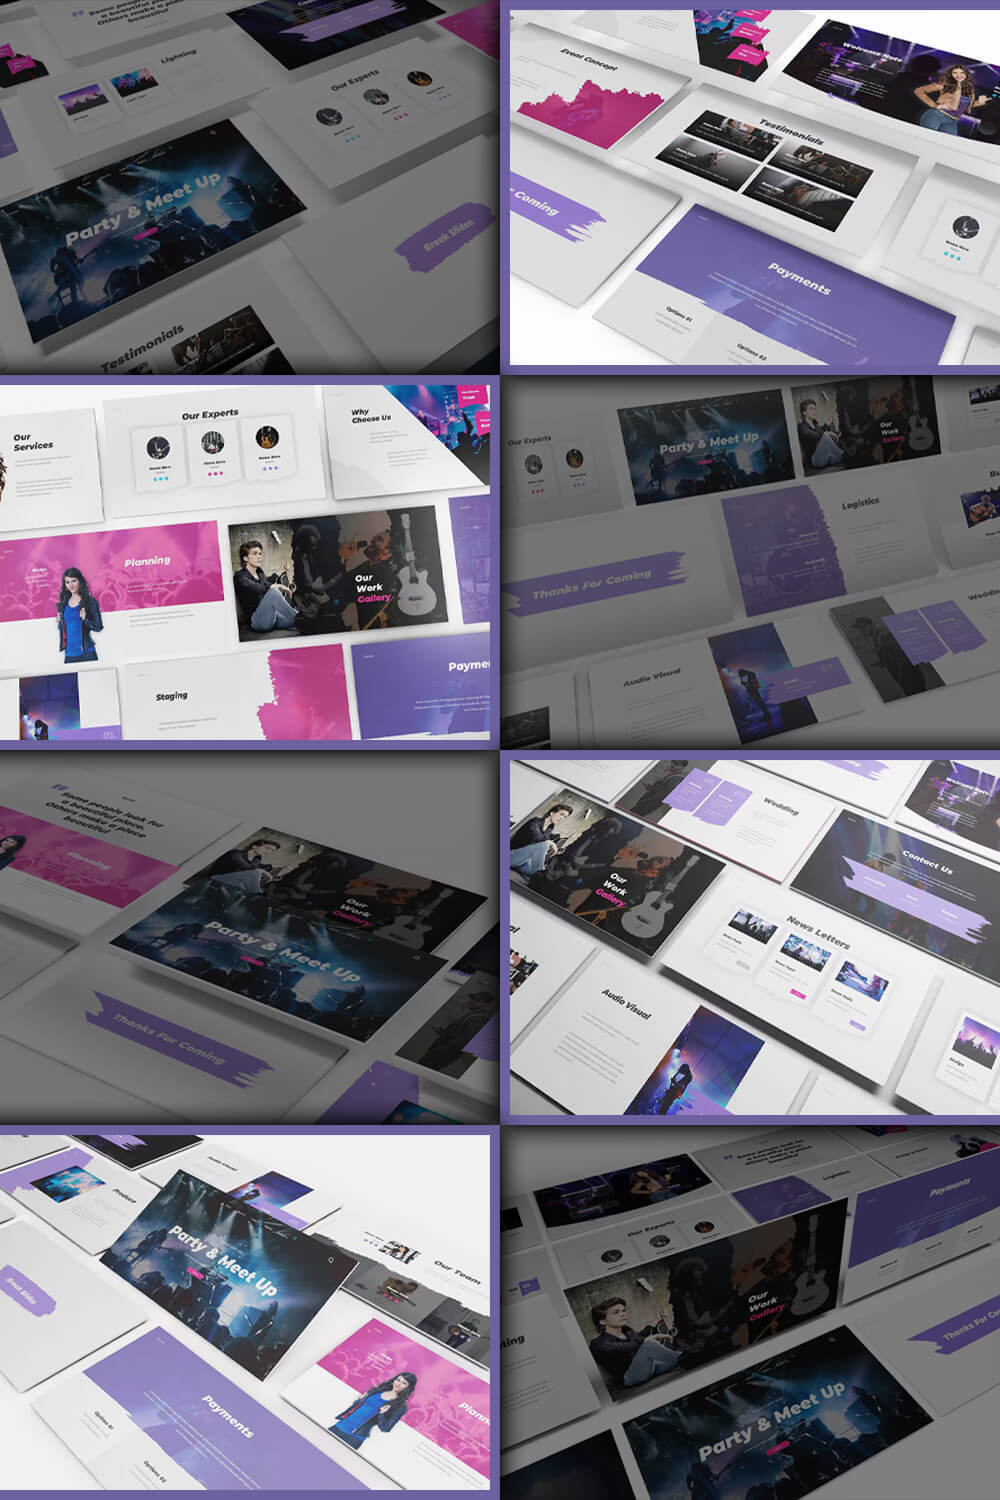 Experts of Party & Meet Up Event Powerpoint Template.